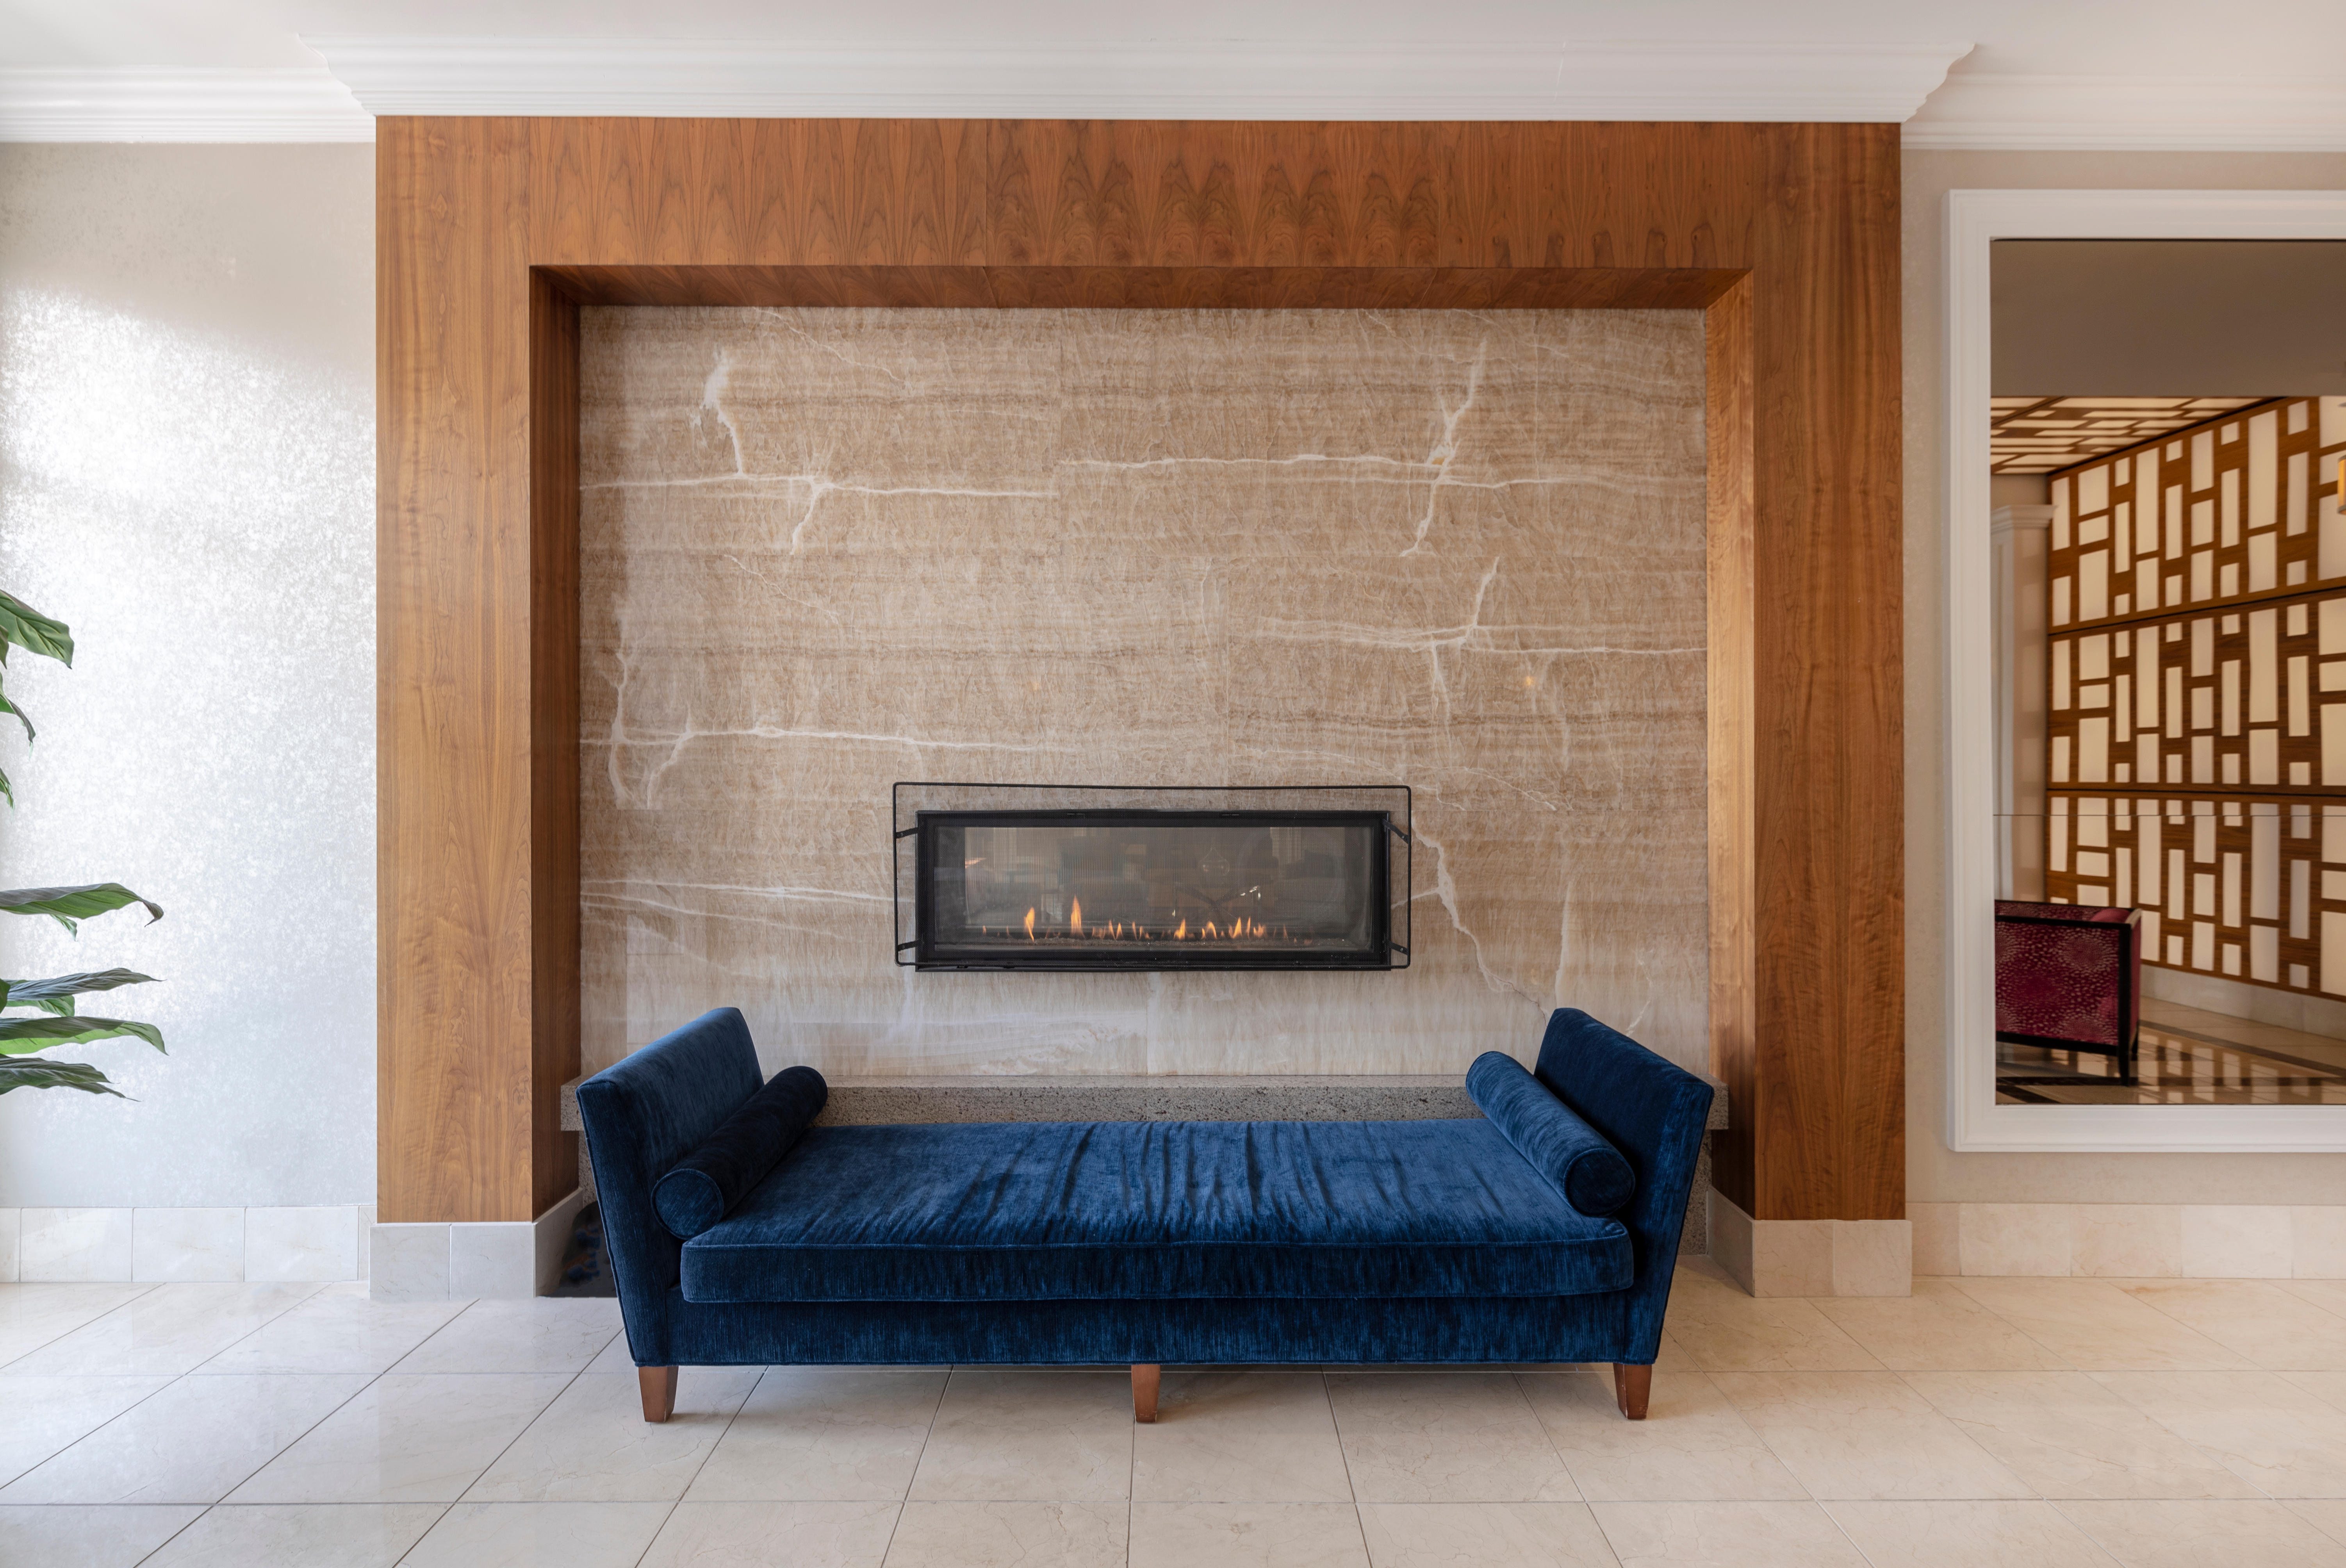 Beautiful, welcoming lobby with fireplace